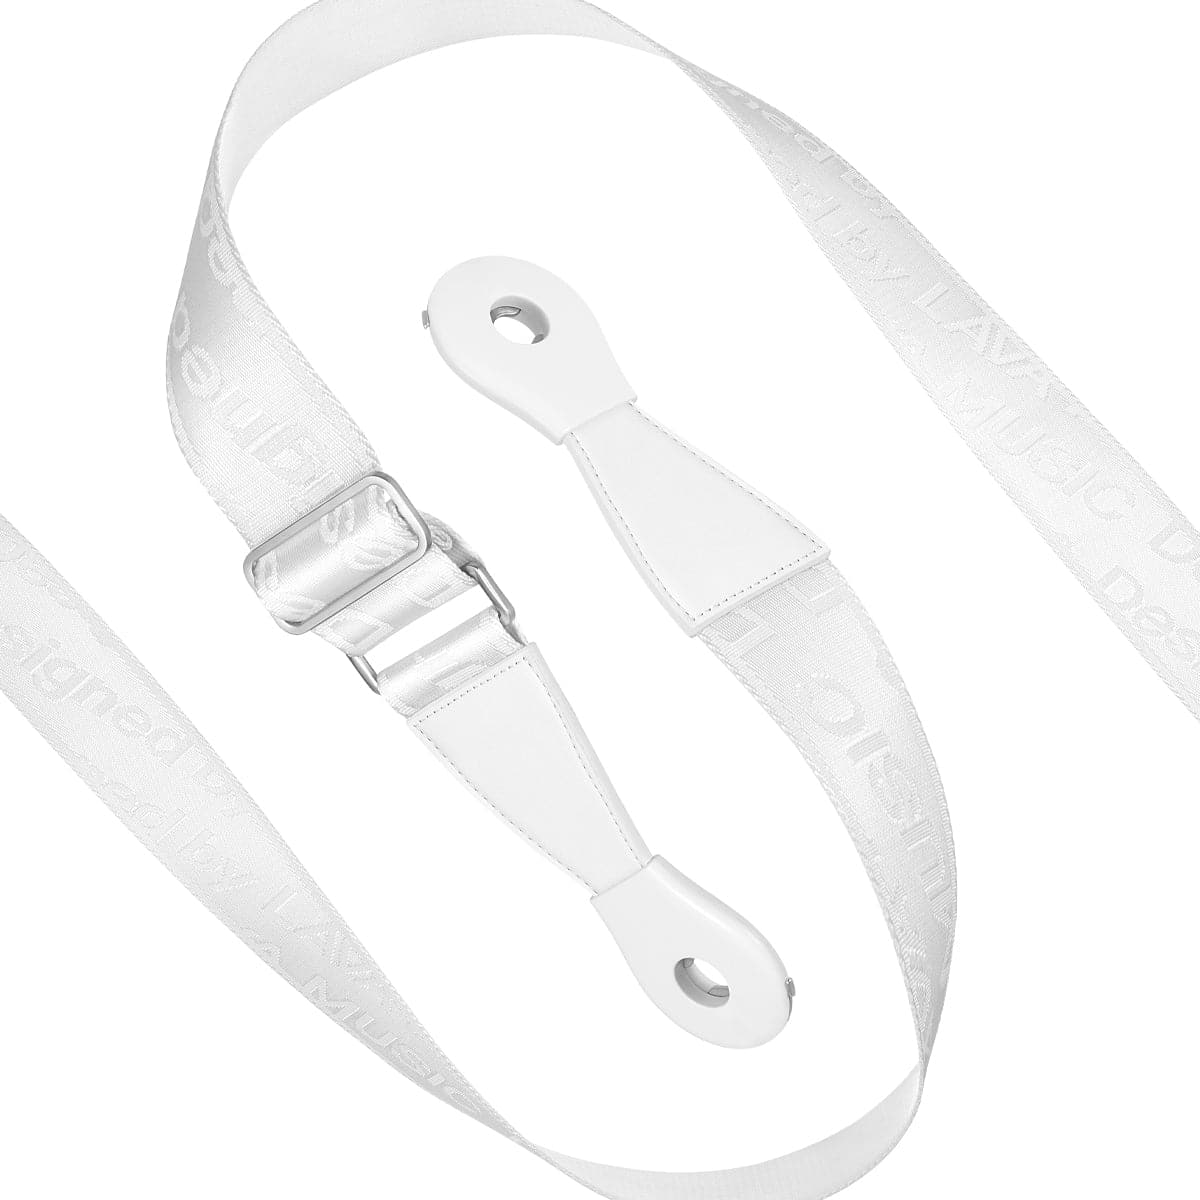 Ideal Strap 2 for LAVA ME PLAY / BLUE LAVA TOUCH ~ White